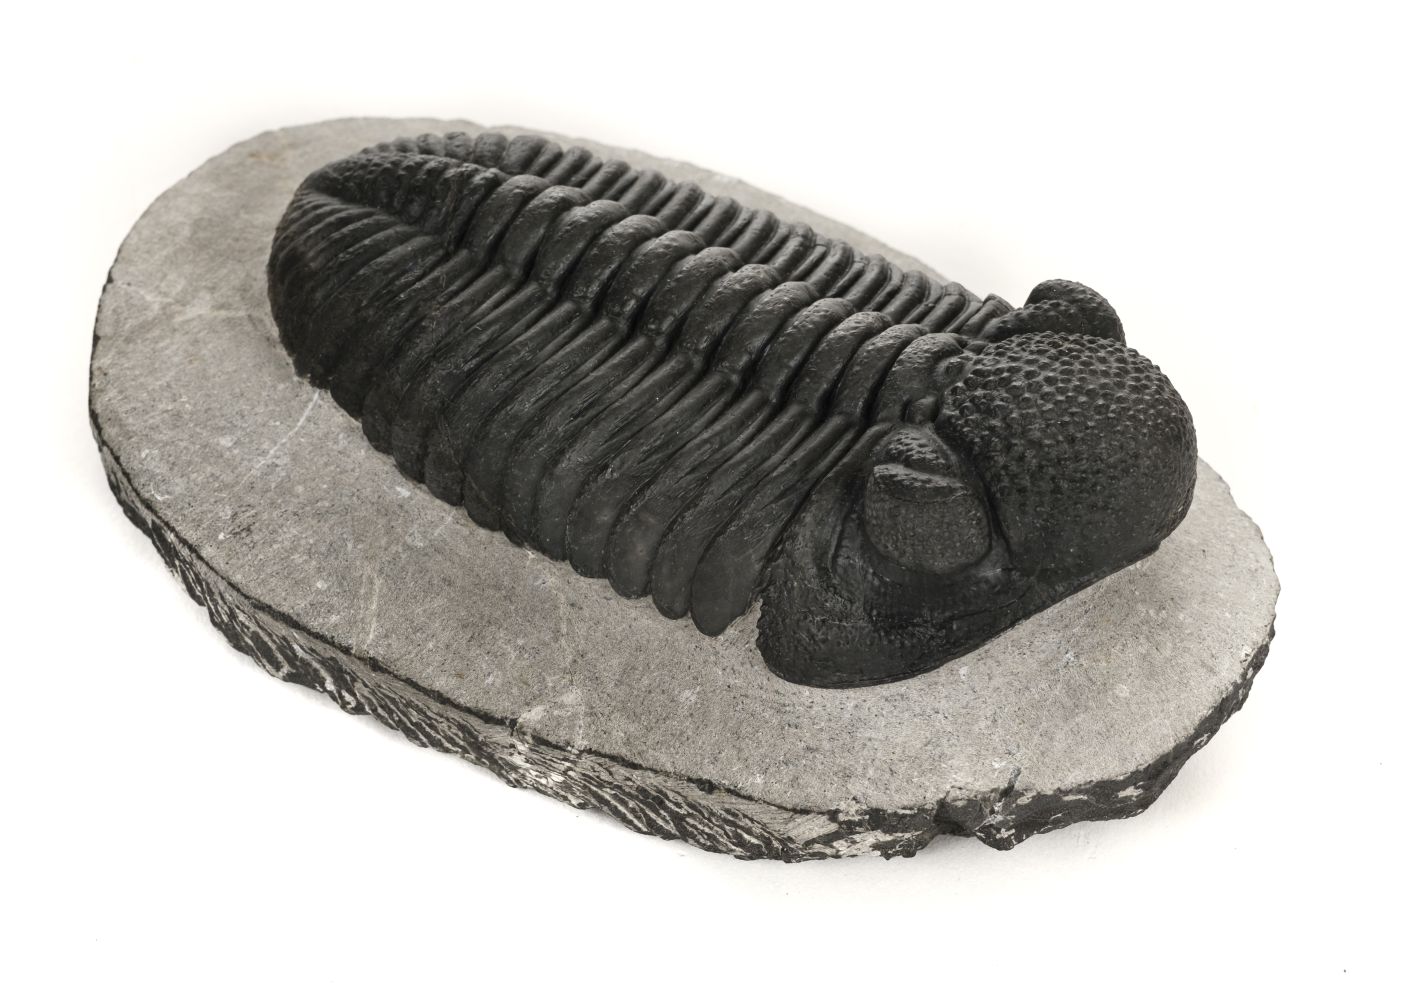 * Drotops Megalomanicus. A large trilobite from the Devonian Period, Morocco